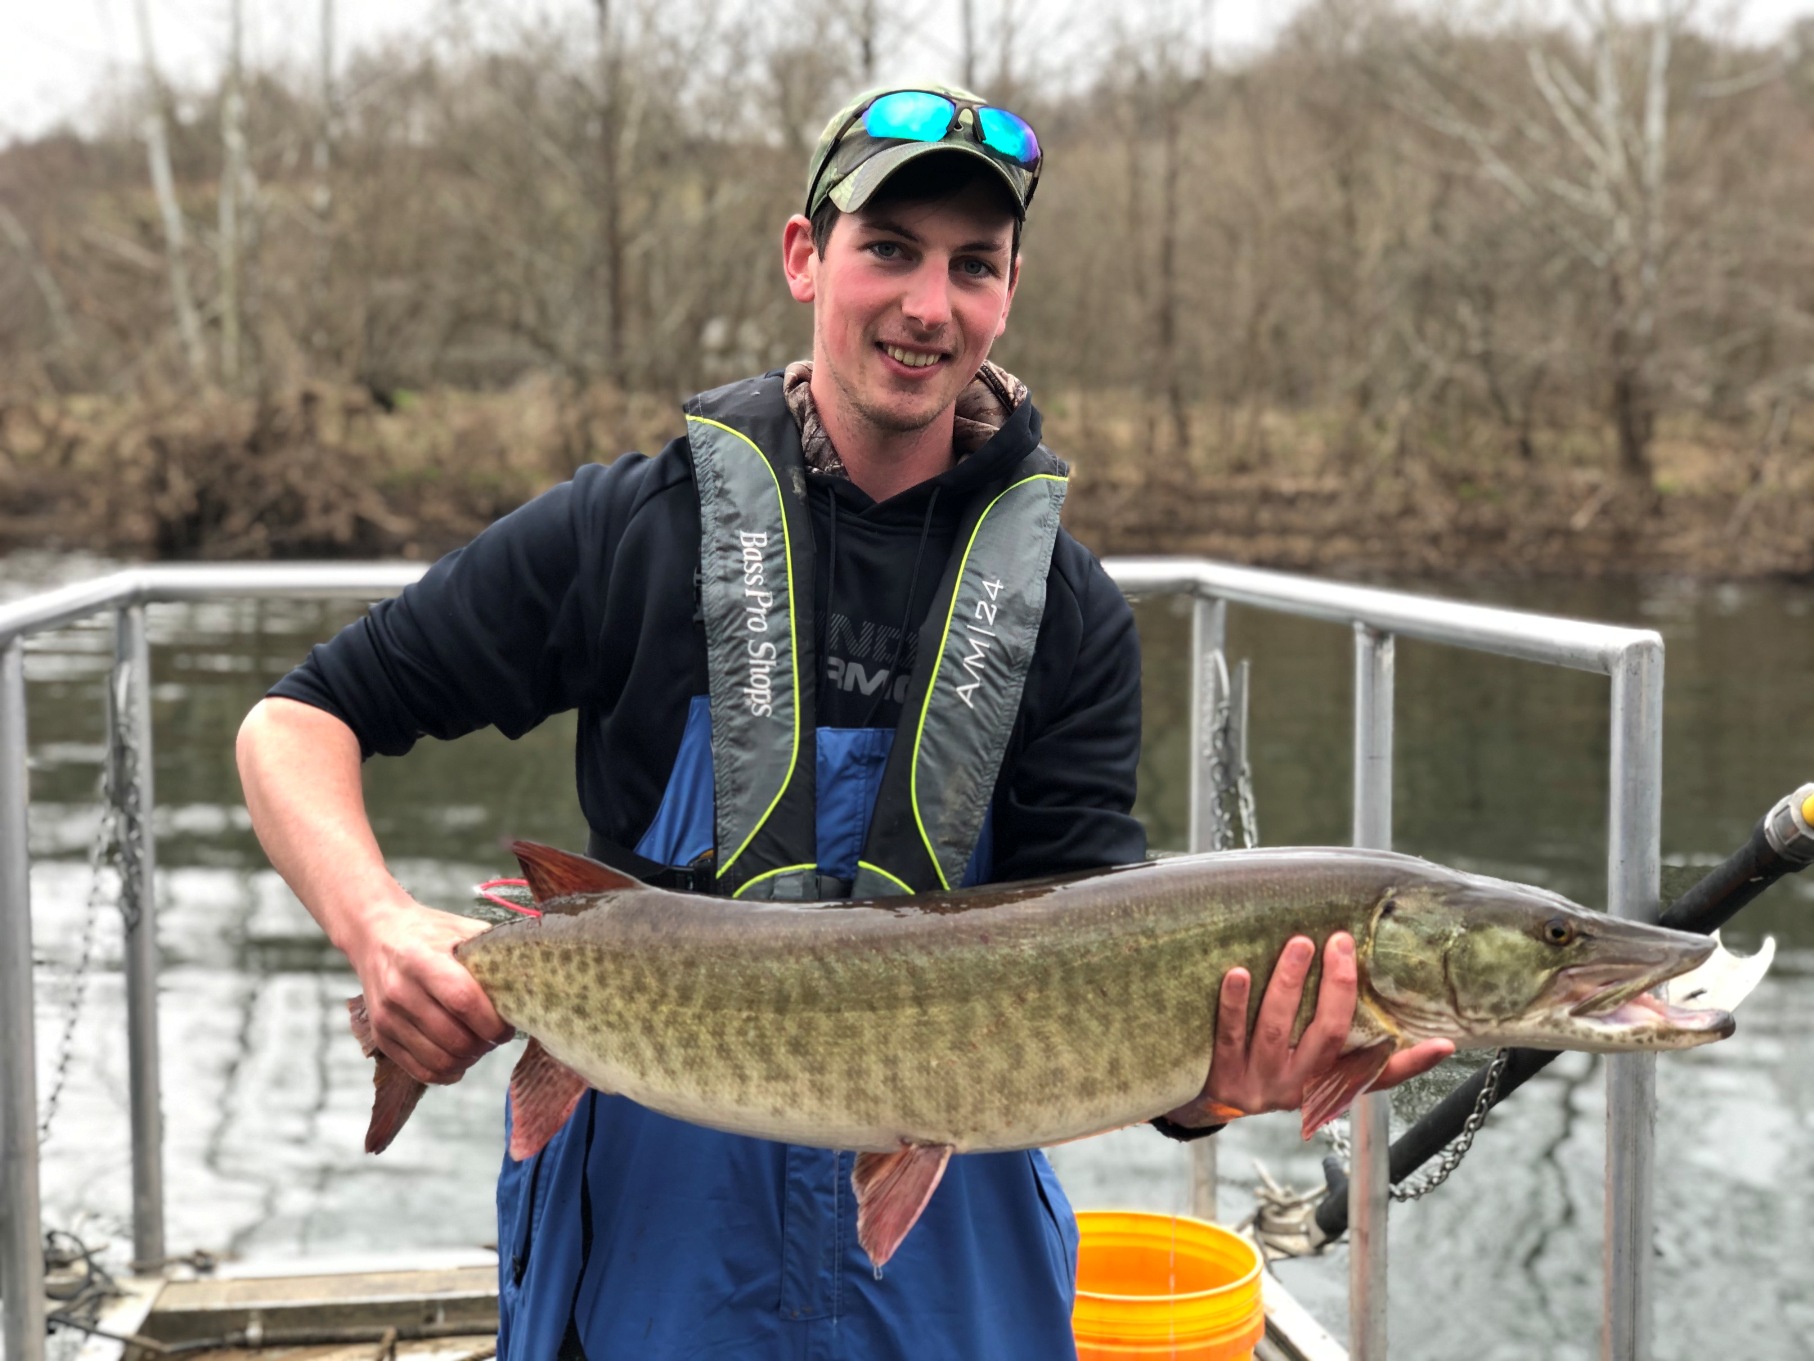 Young angler 'nuts about fishing' reels in 40 inch muskie